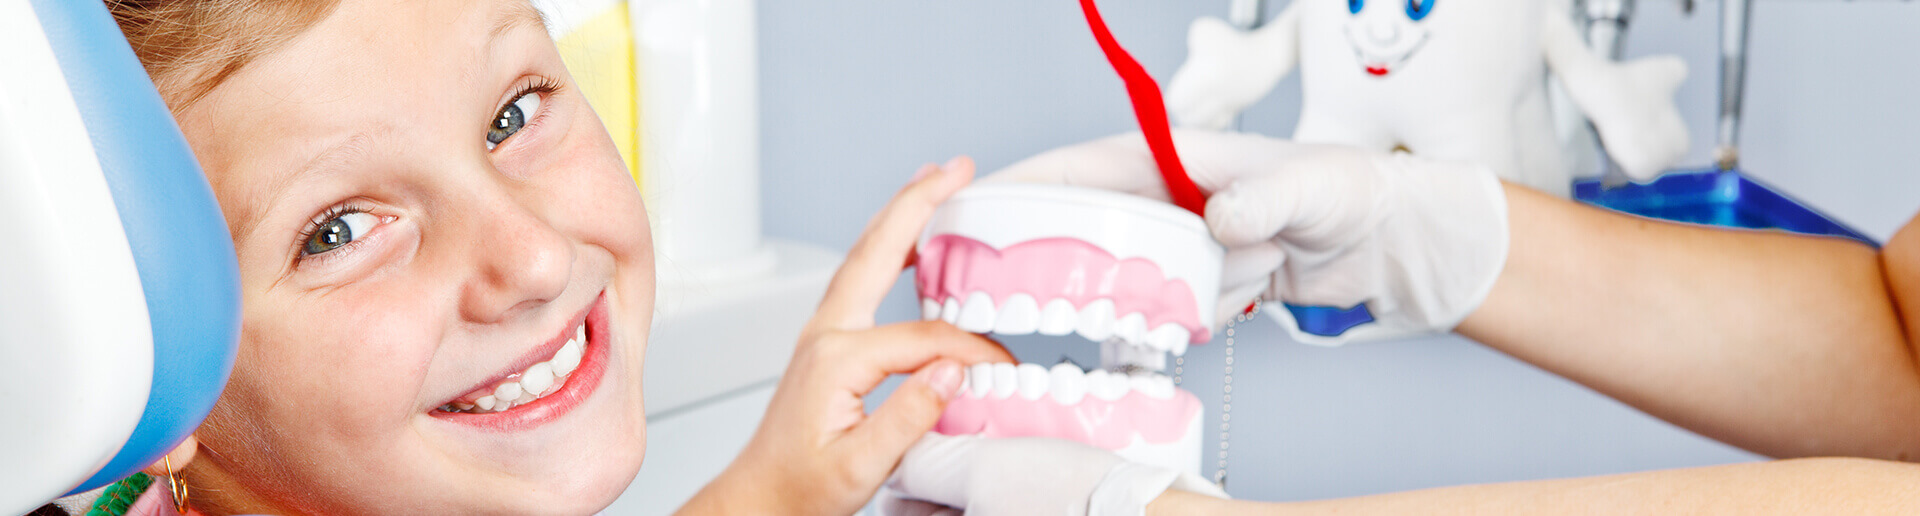 Dental Care Facts: The Difference Between Plaque and Tartar Columbus Dentist